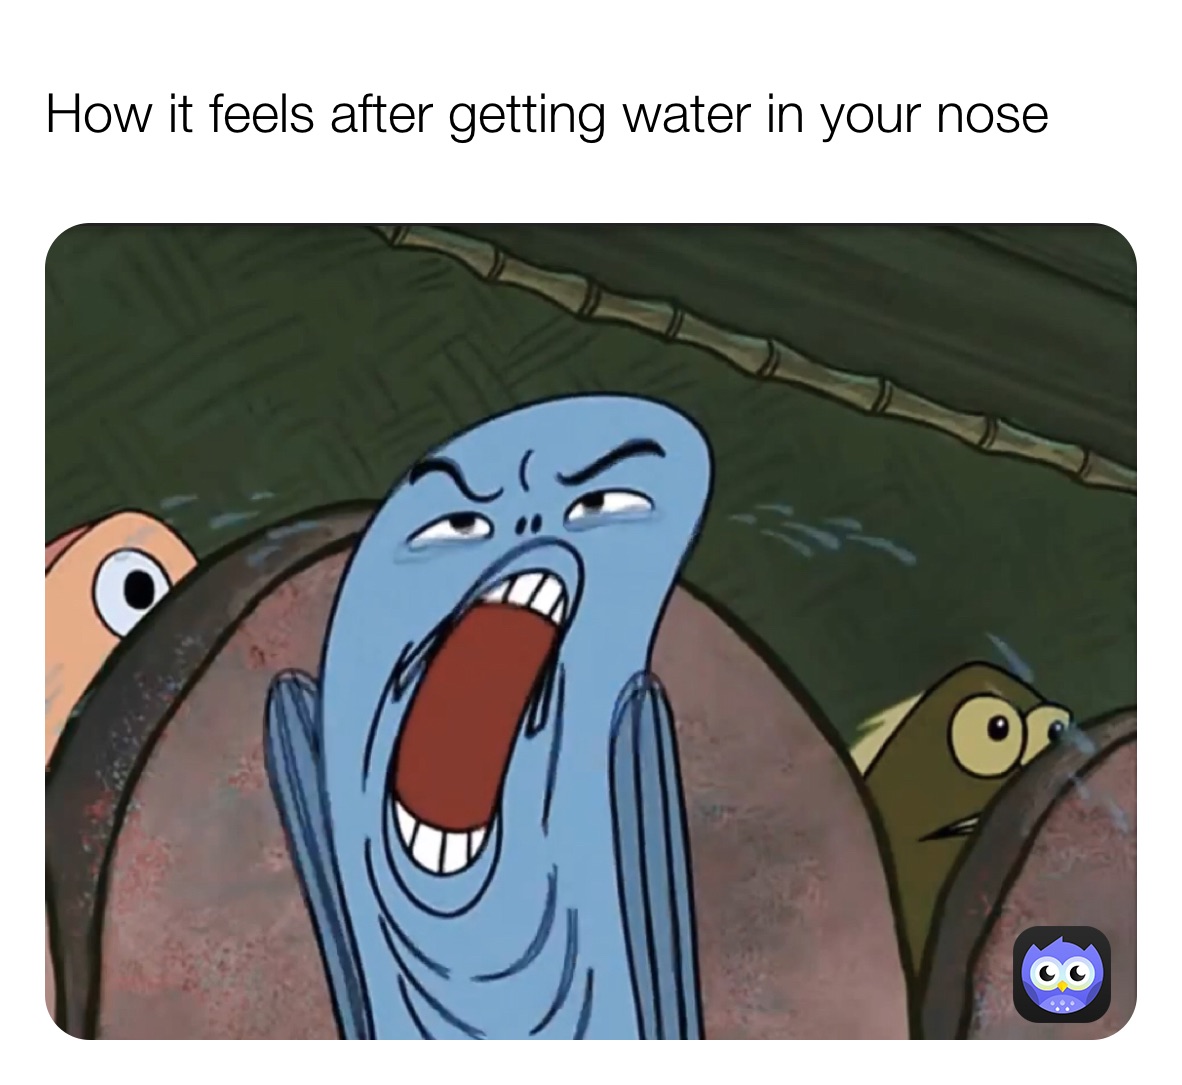 How it feels after getting water in your nose